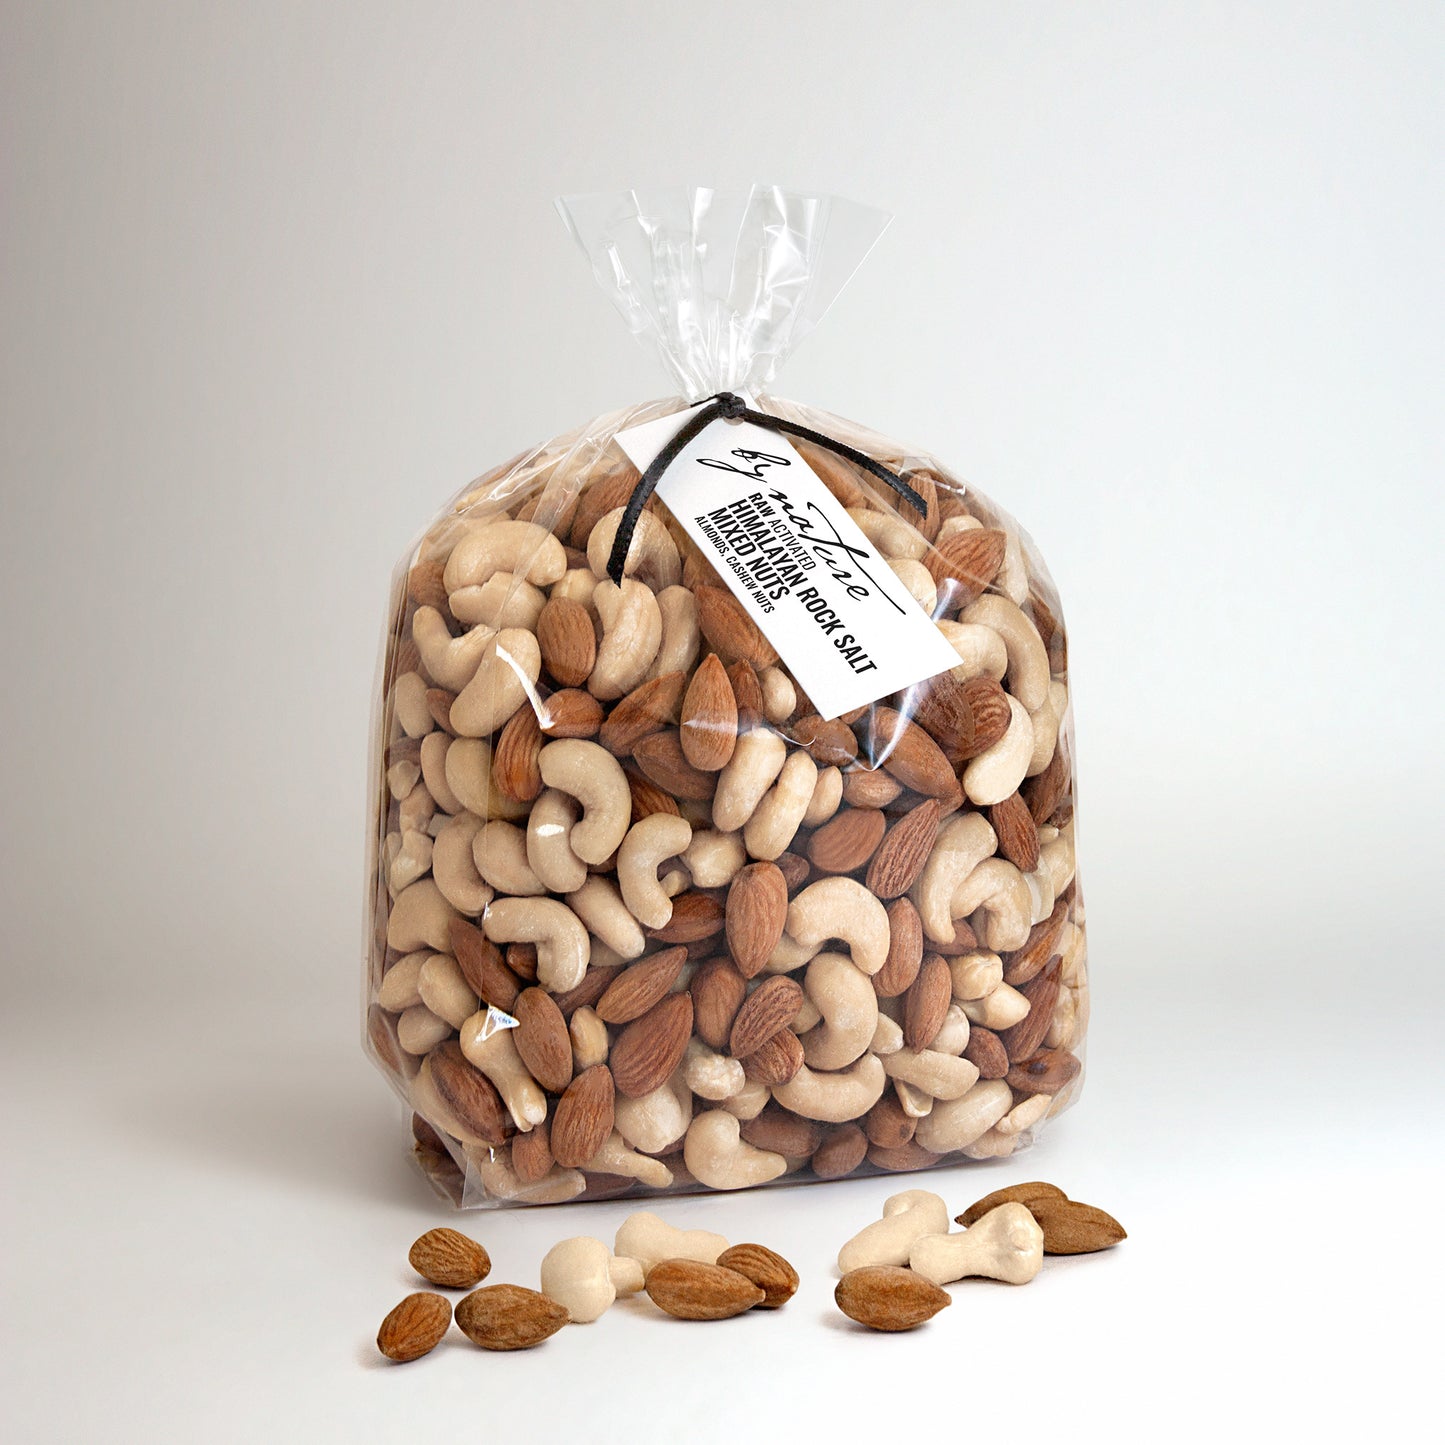 BY NATURE Mixed Nuts, Himalayan Rock Salt - Almonds, Cashew Nuts